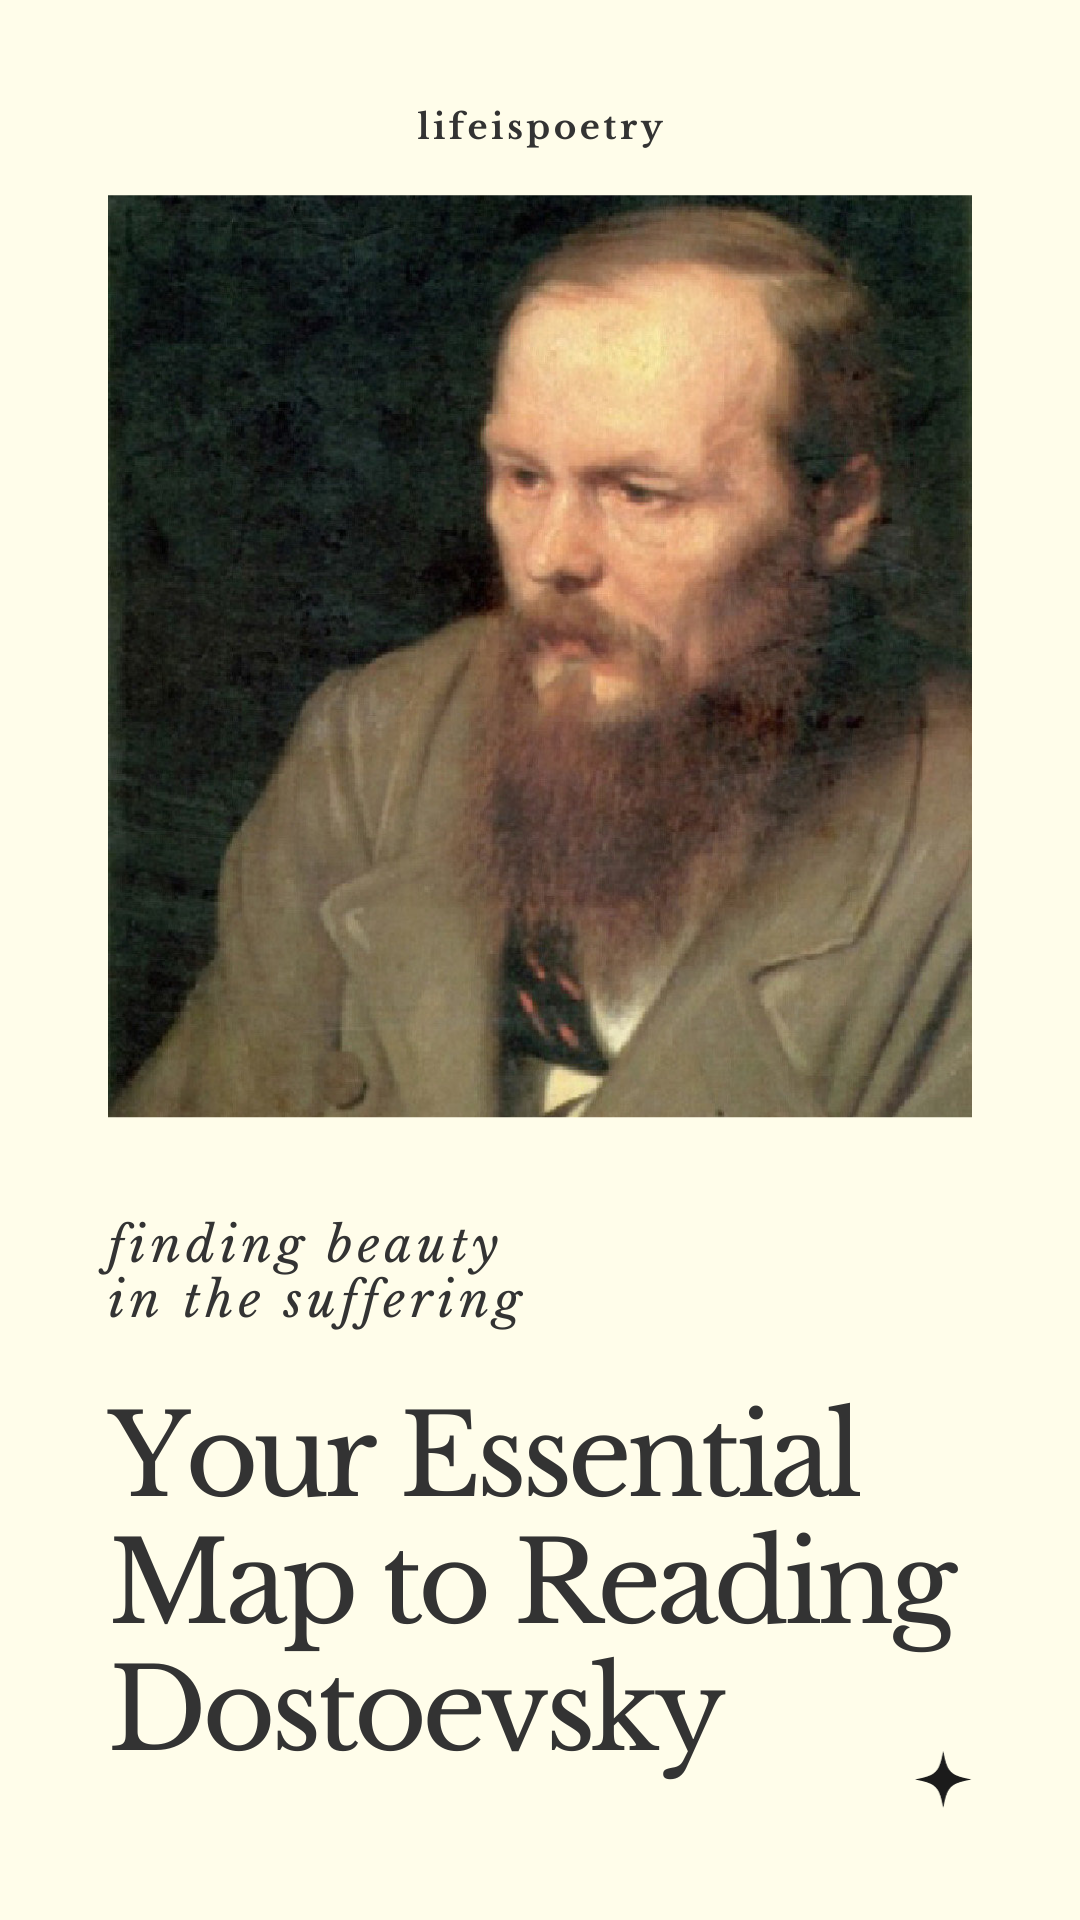 Start Here: 5 Reasons Dostoevsky is Your Next Literary Obsession